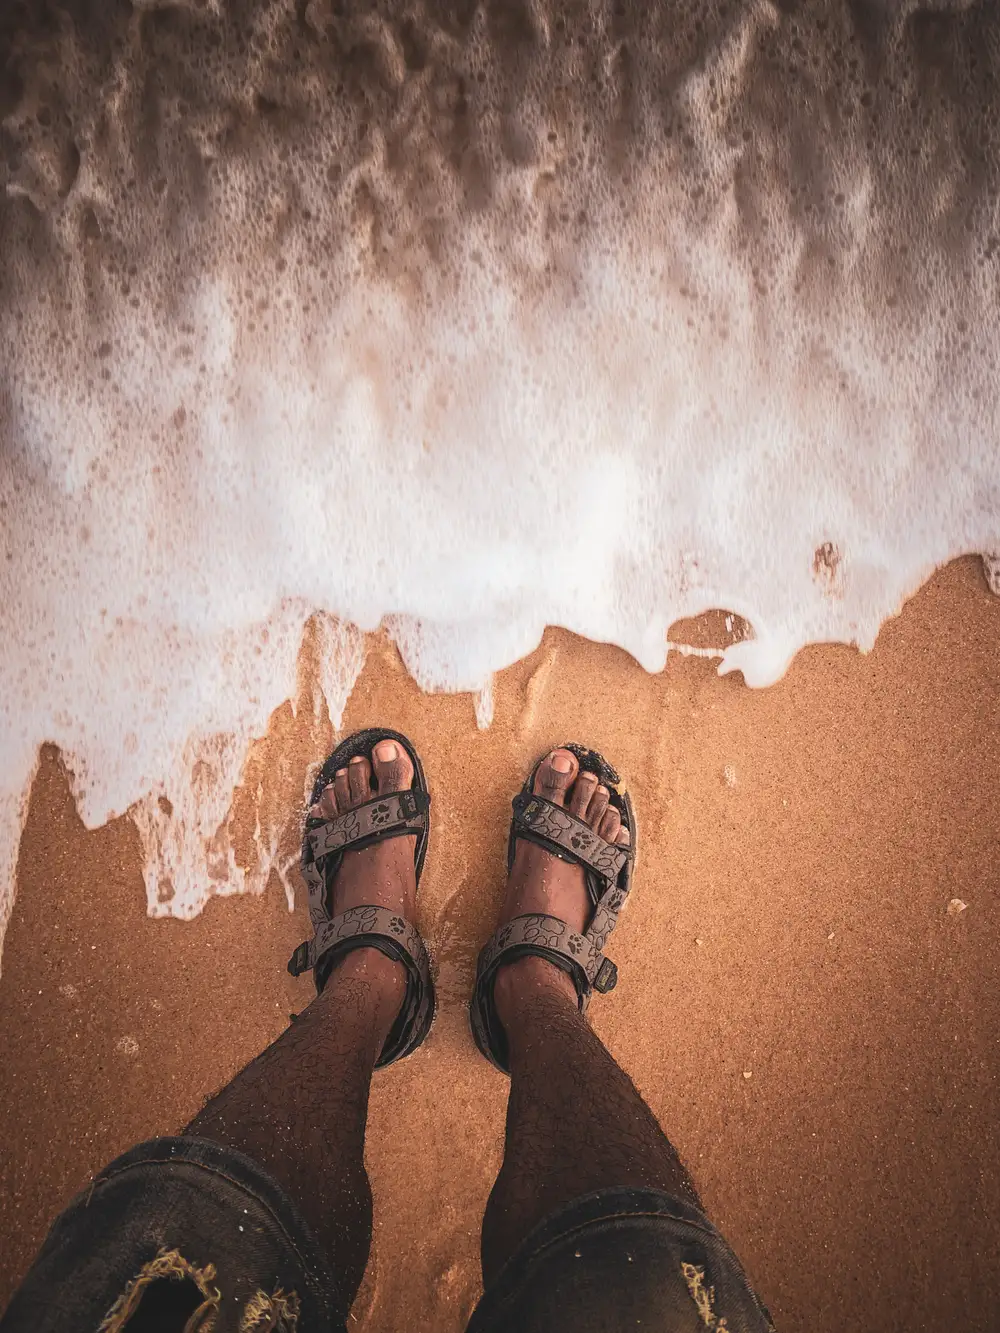 Person with sandals standing on beach sand